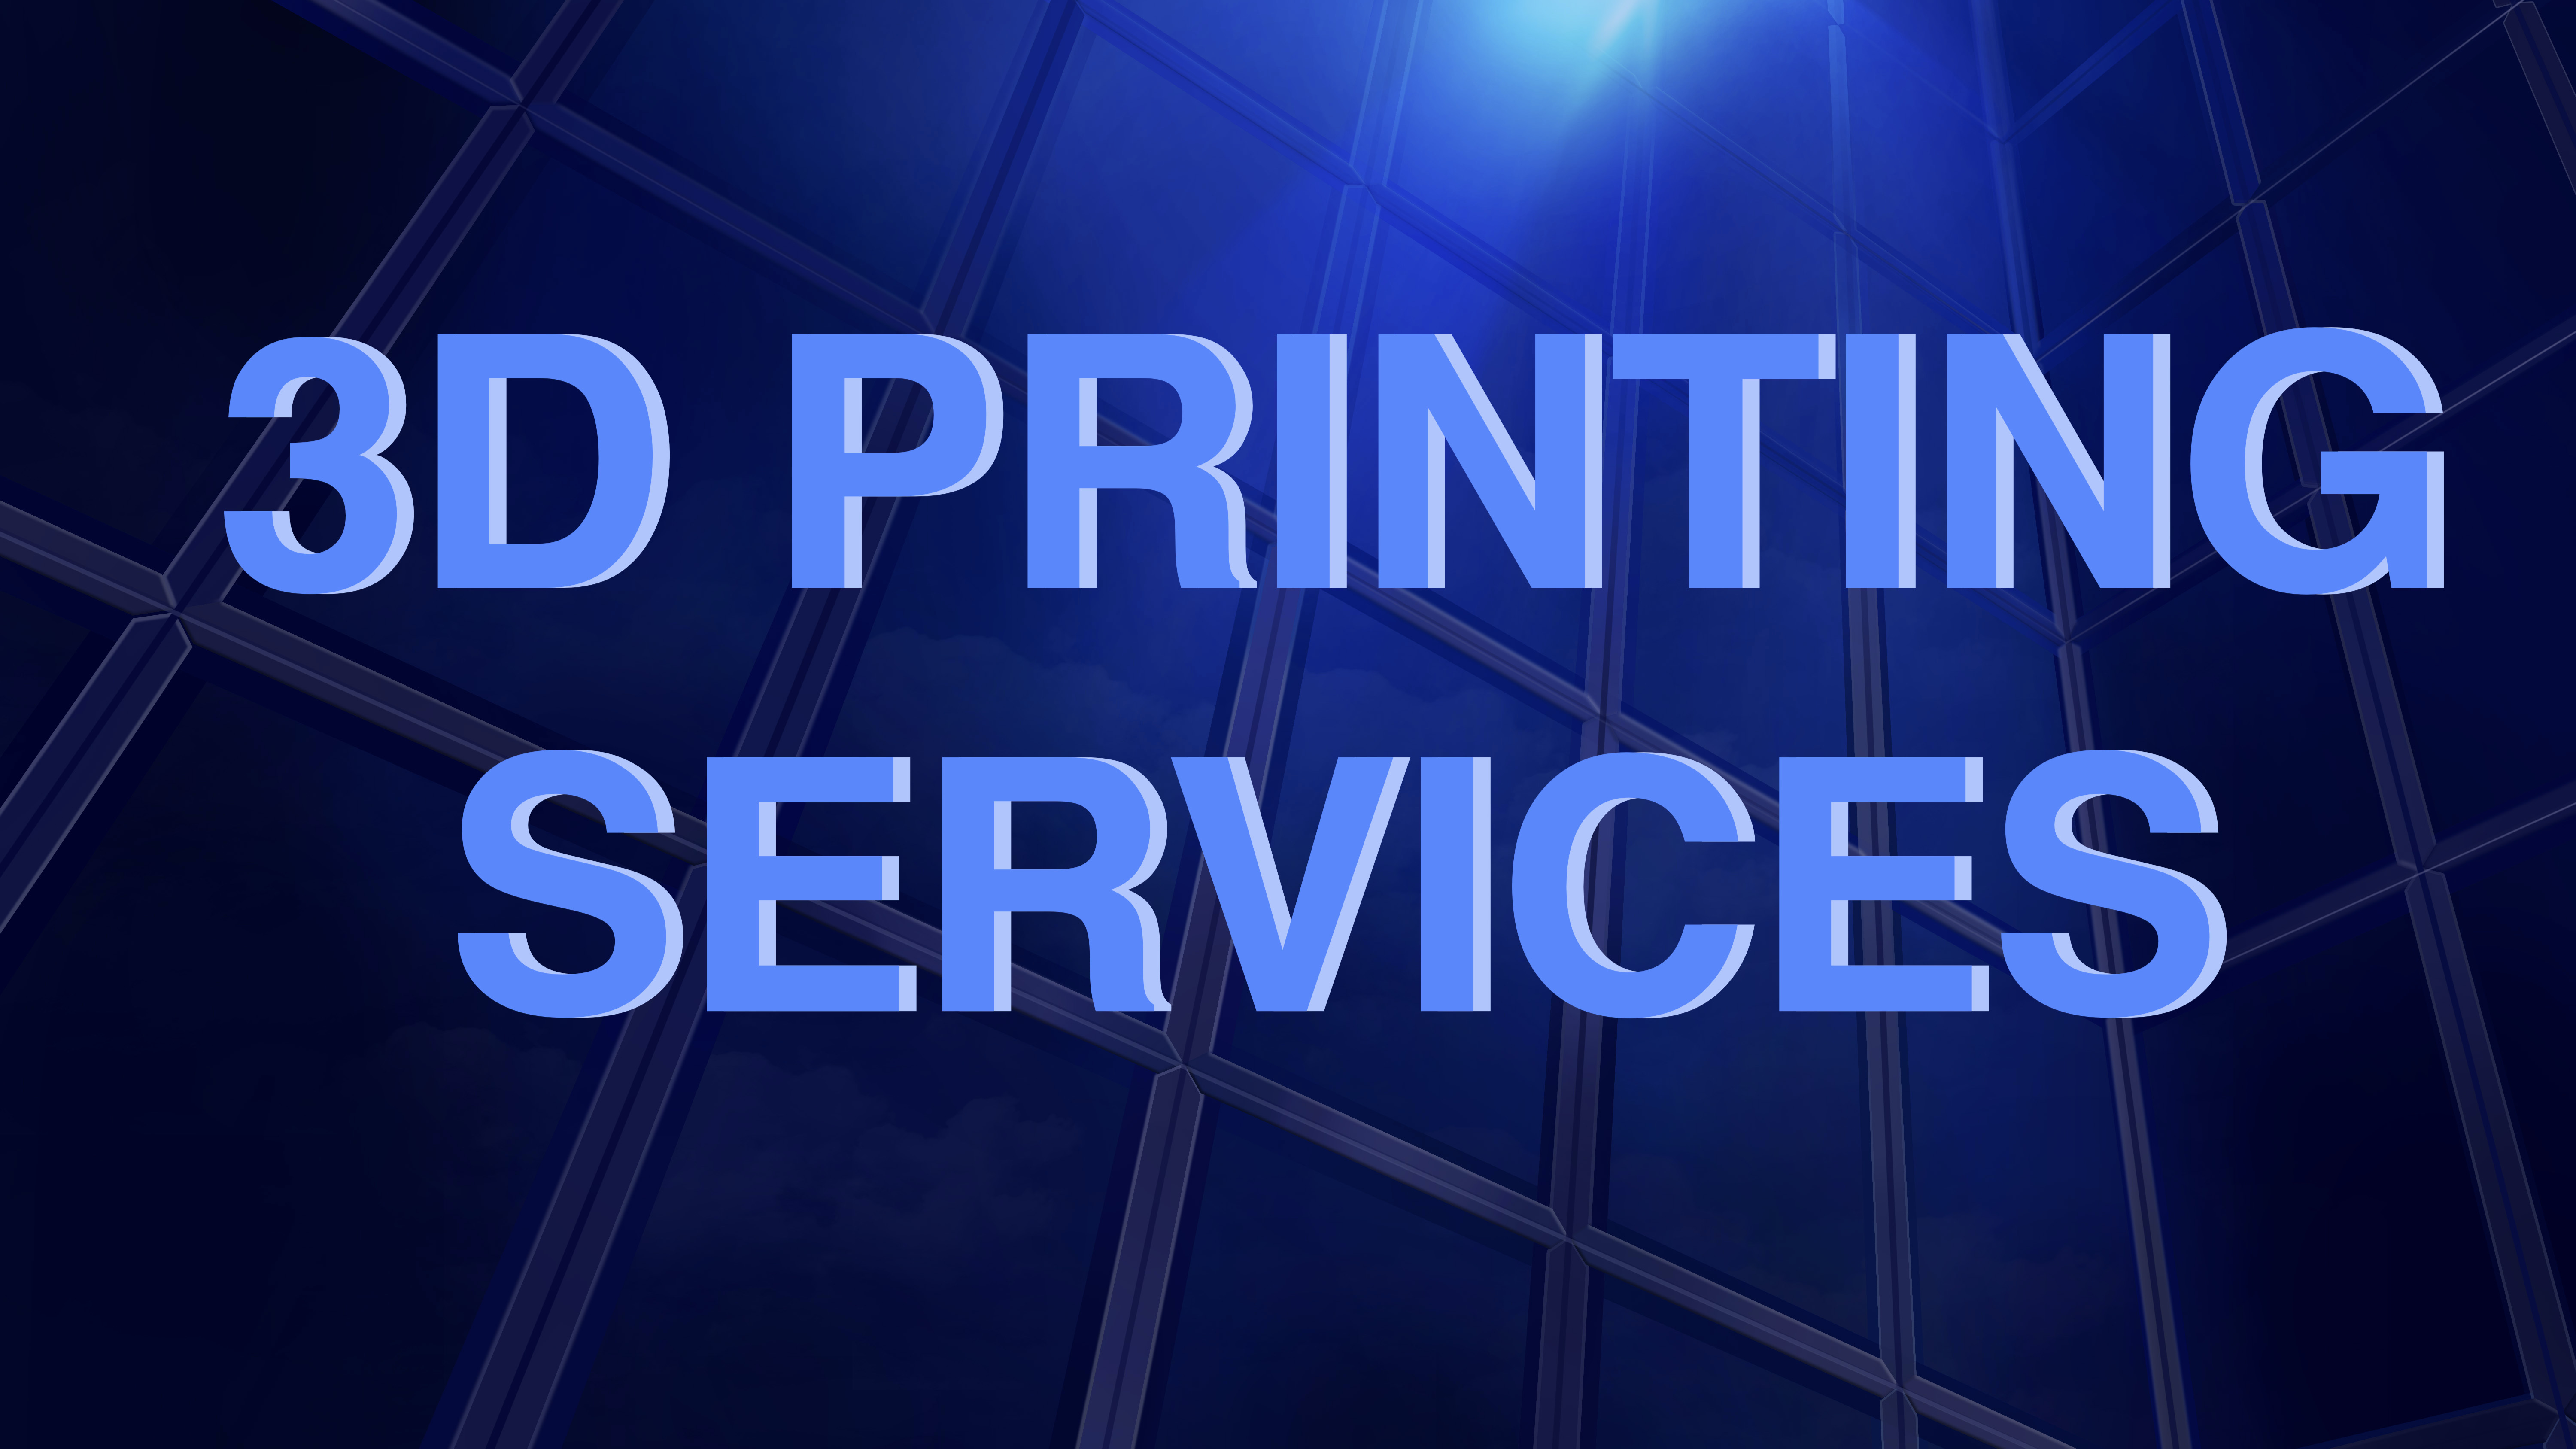 Image with blue background and text - 3D Printing Services